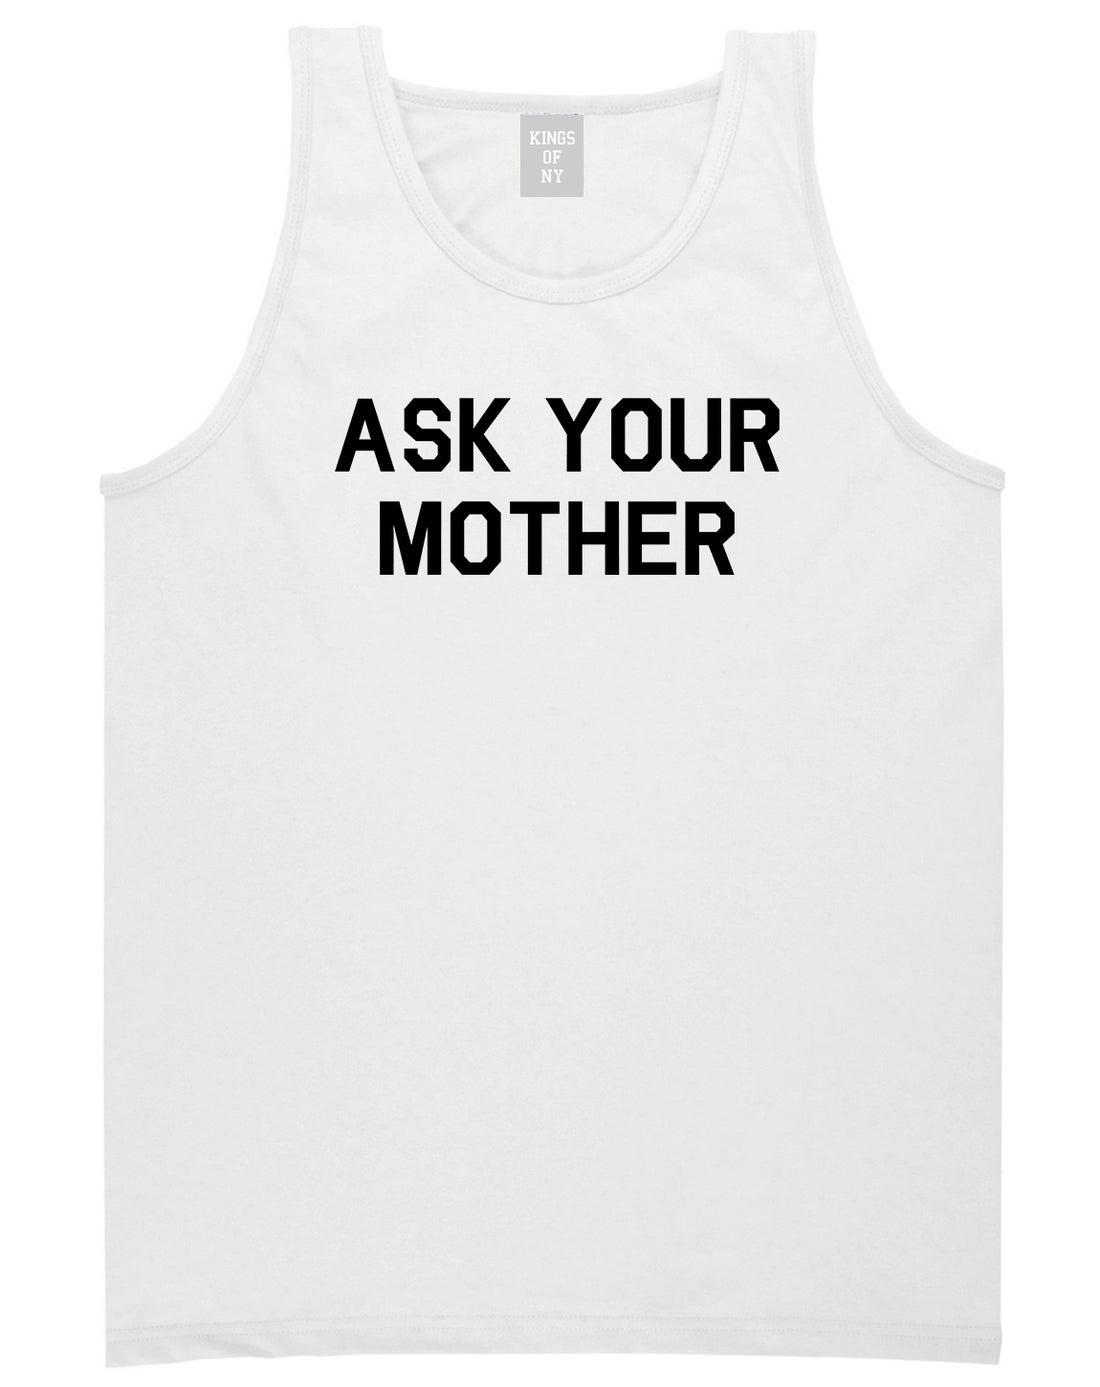 Ask Your Mother Funny Dad Mens Tank Top Shirt White by Kings Of NY